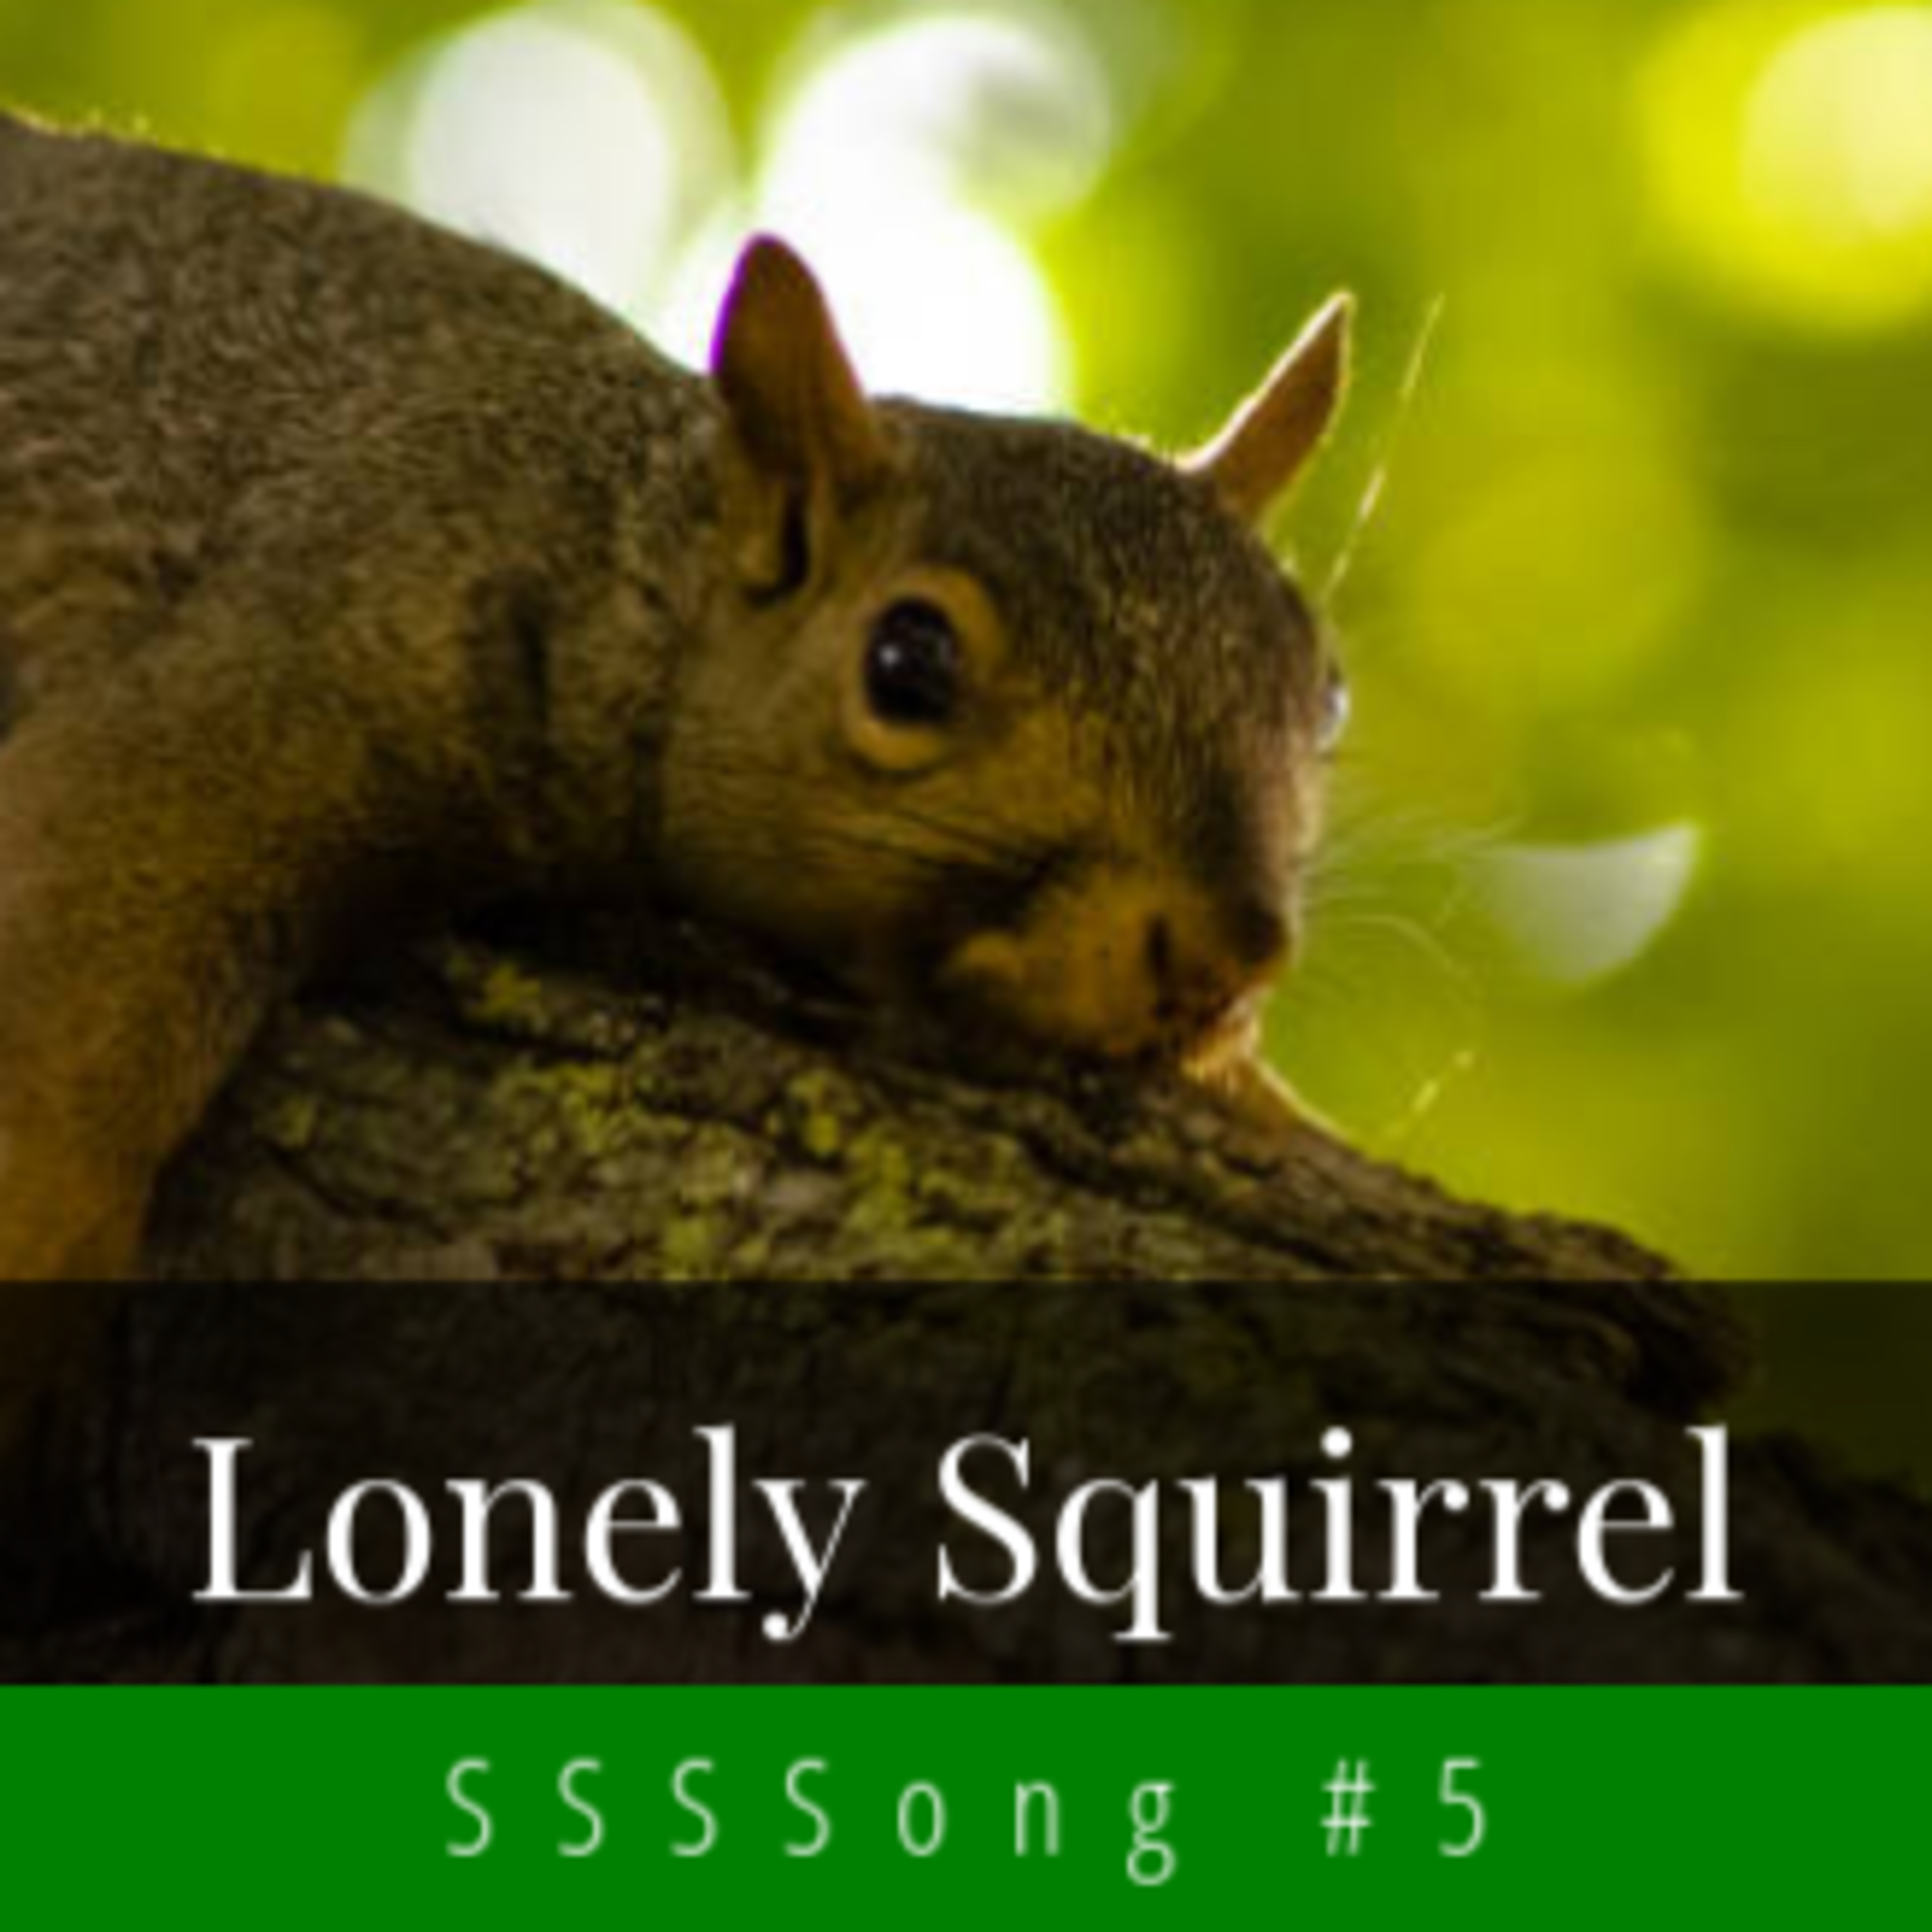 SSSSong #5: Lonely Squirrel (The Squirrel and the Hippo)